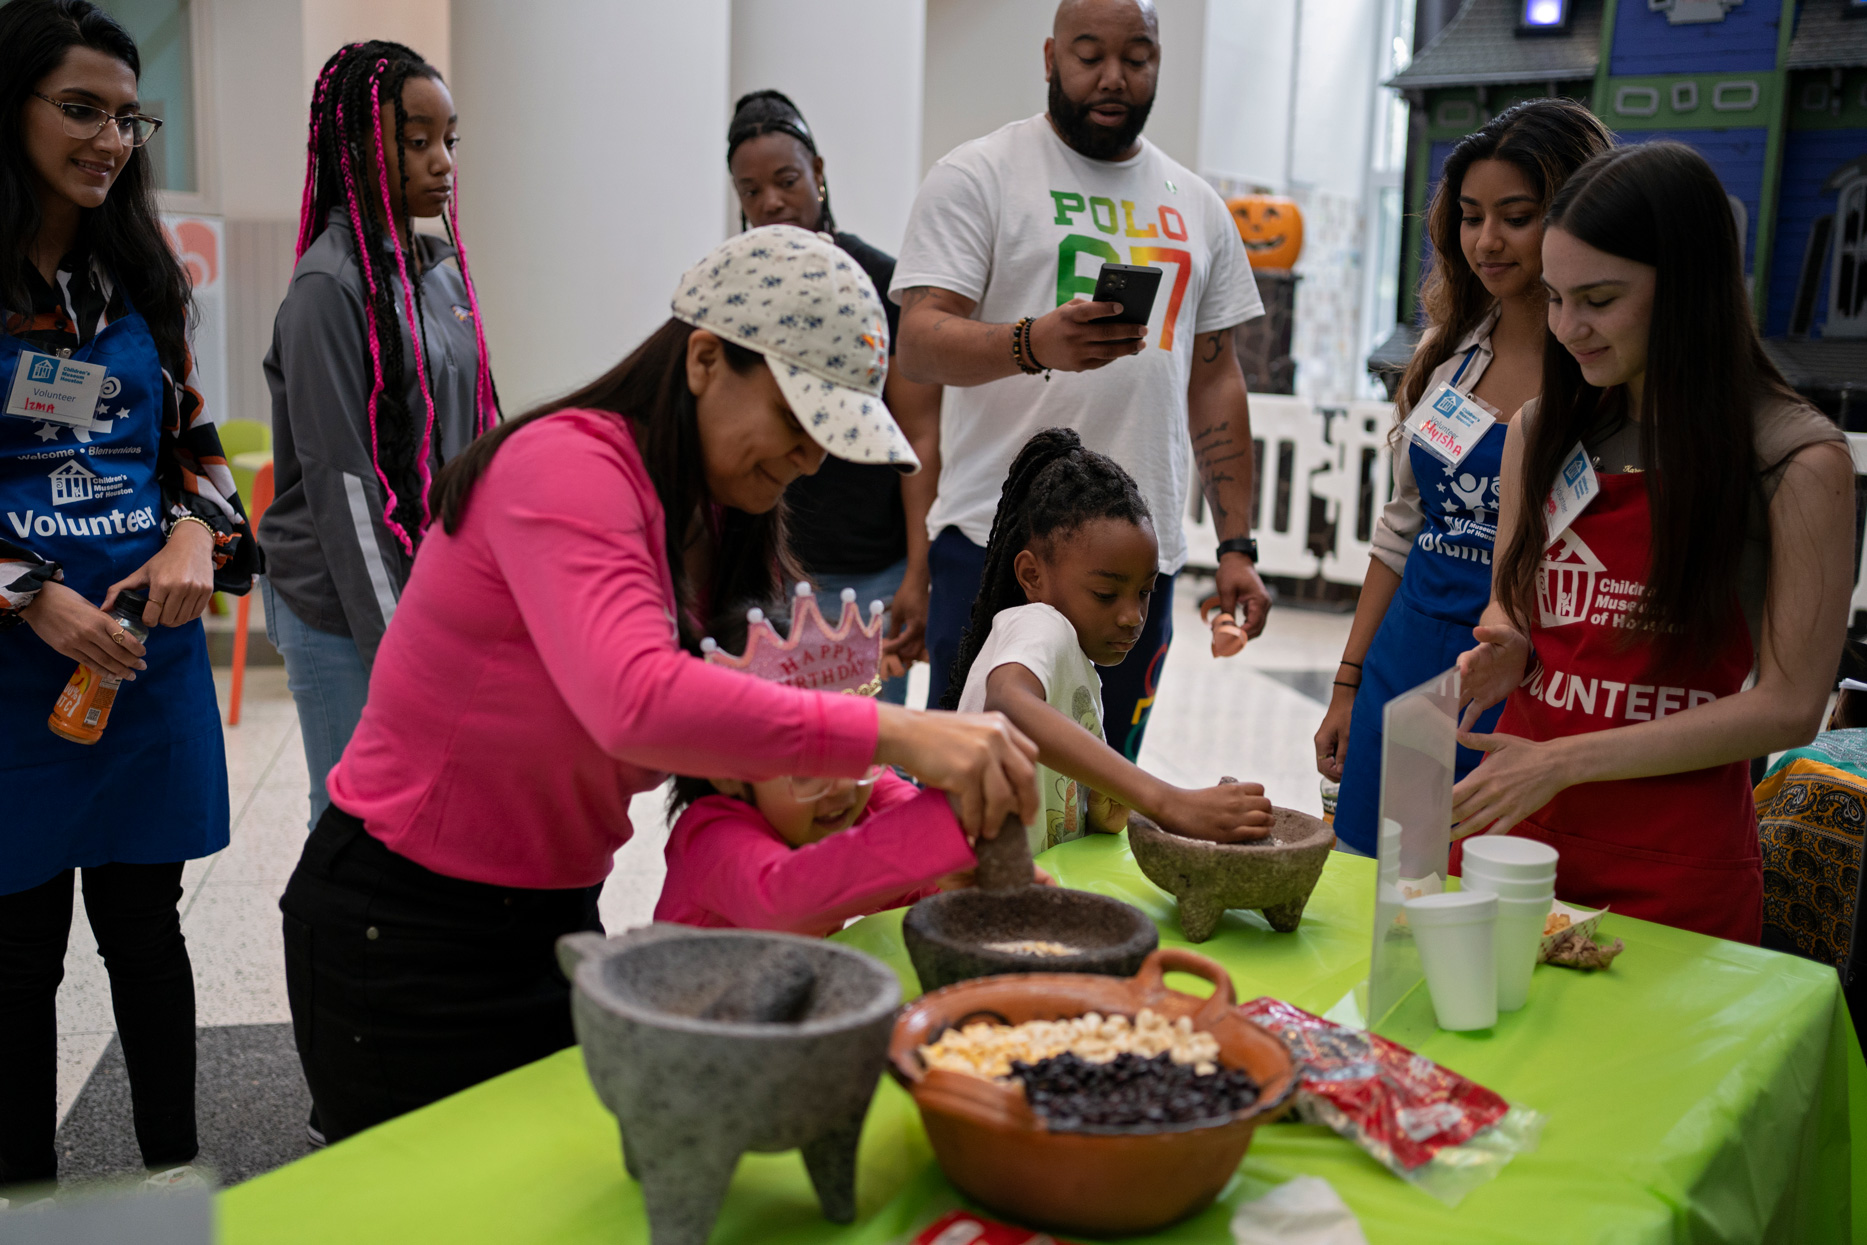 Children grind corn during the Indigenous People's Day commemoration at the Children’s Museum Houston